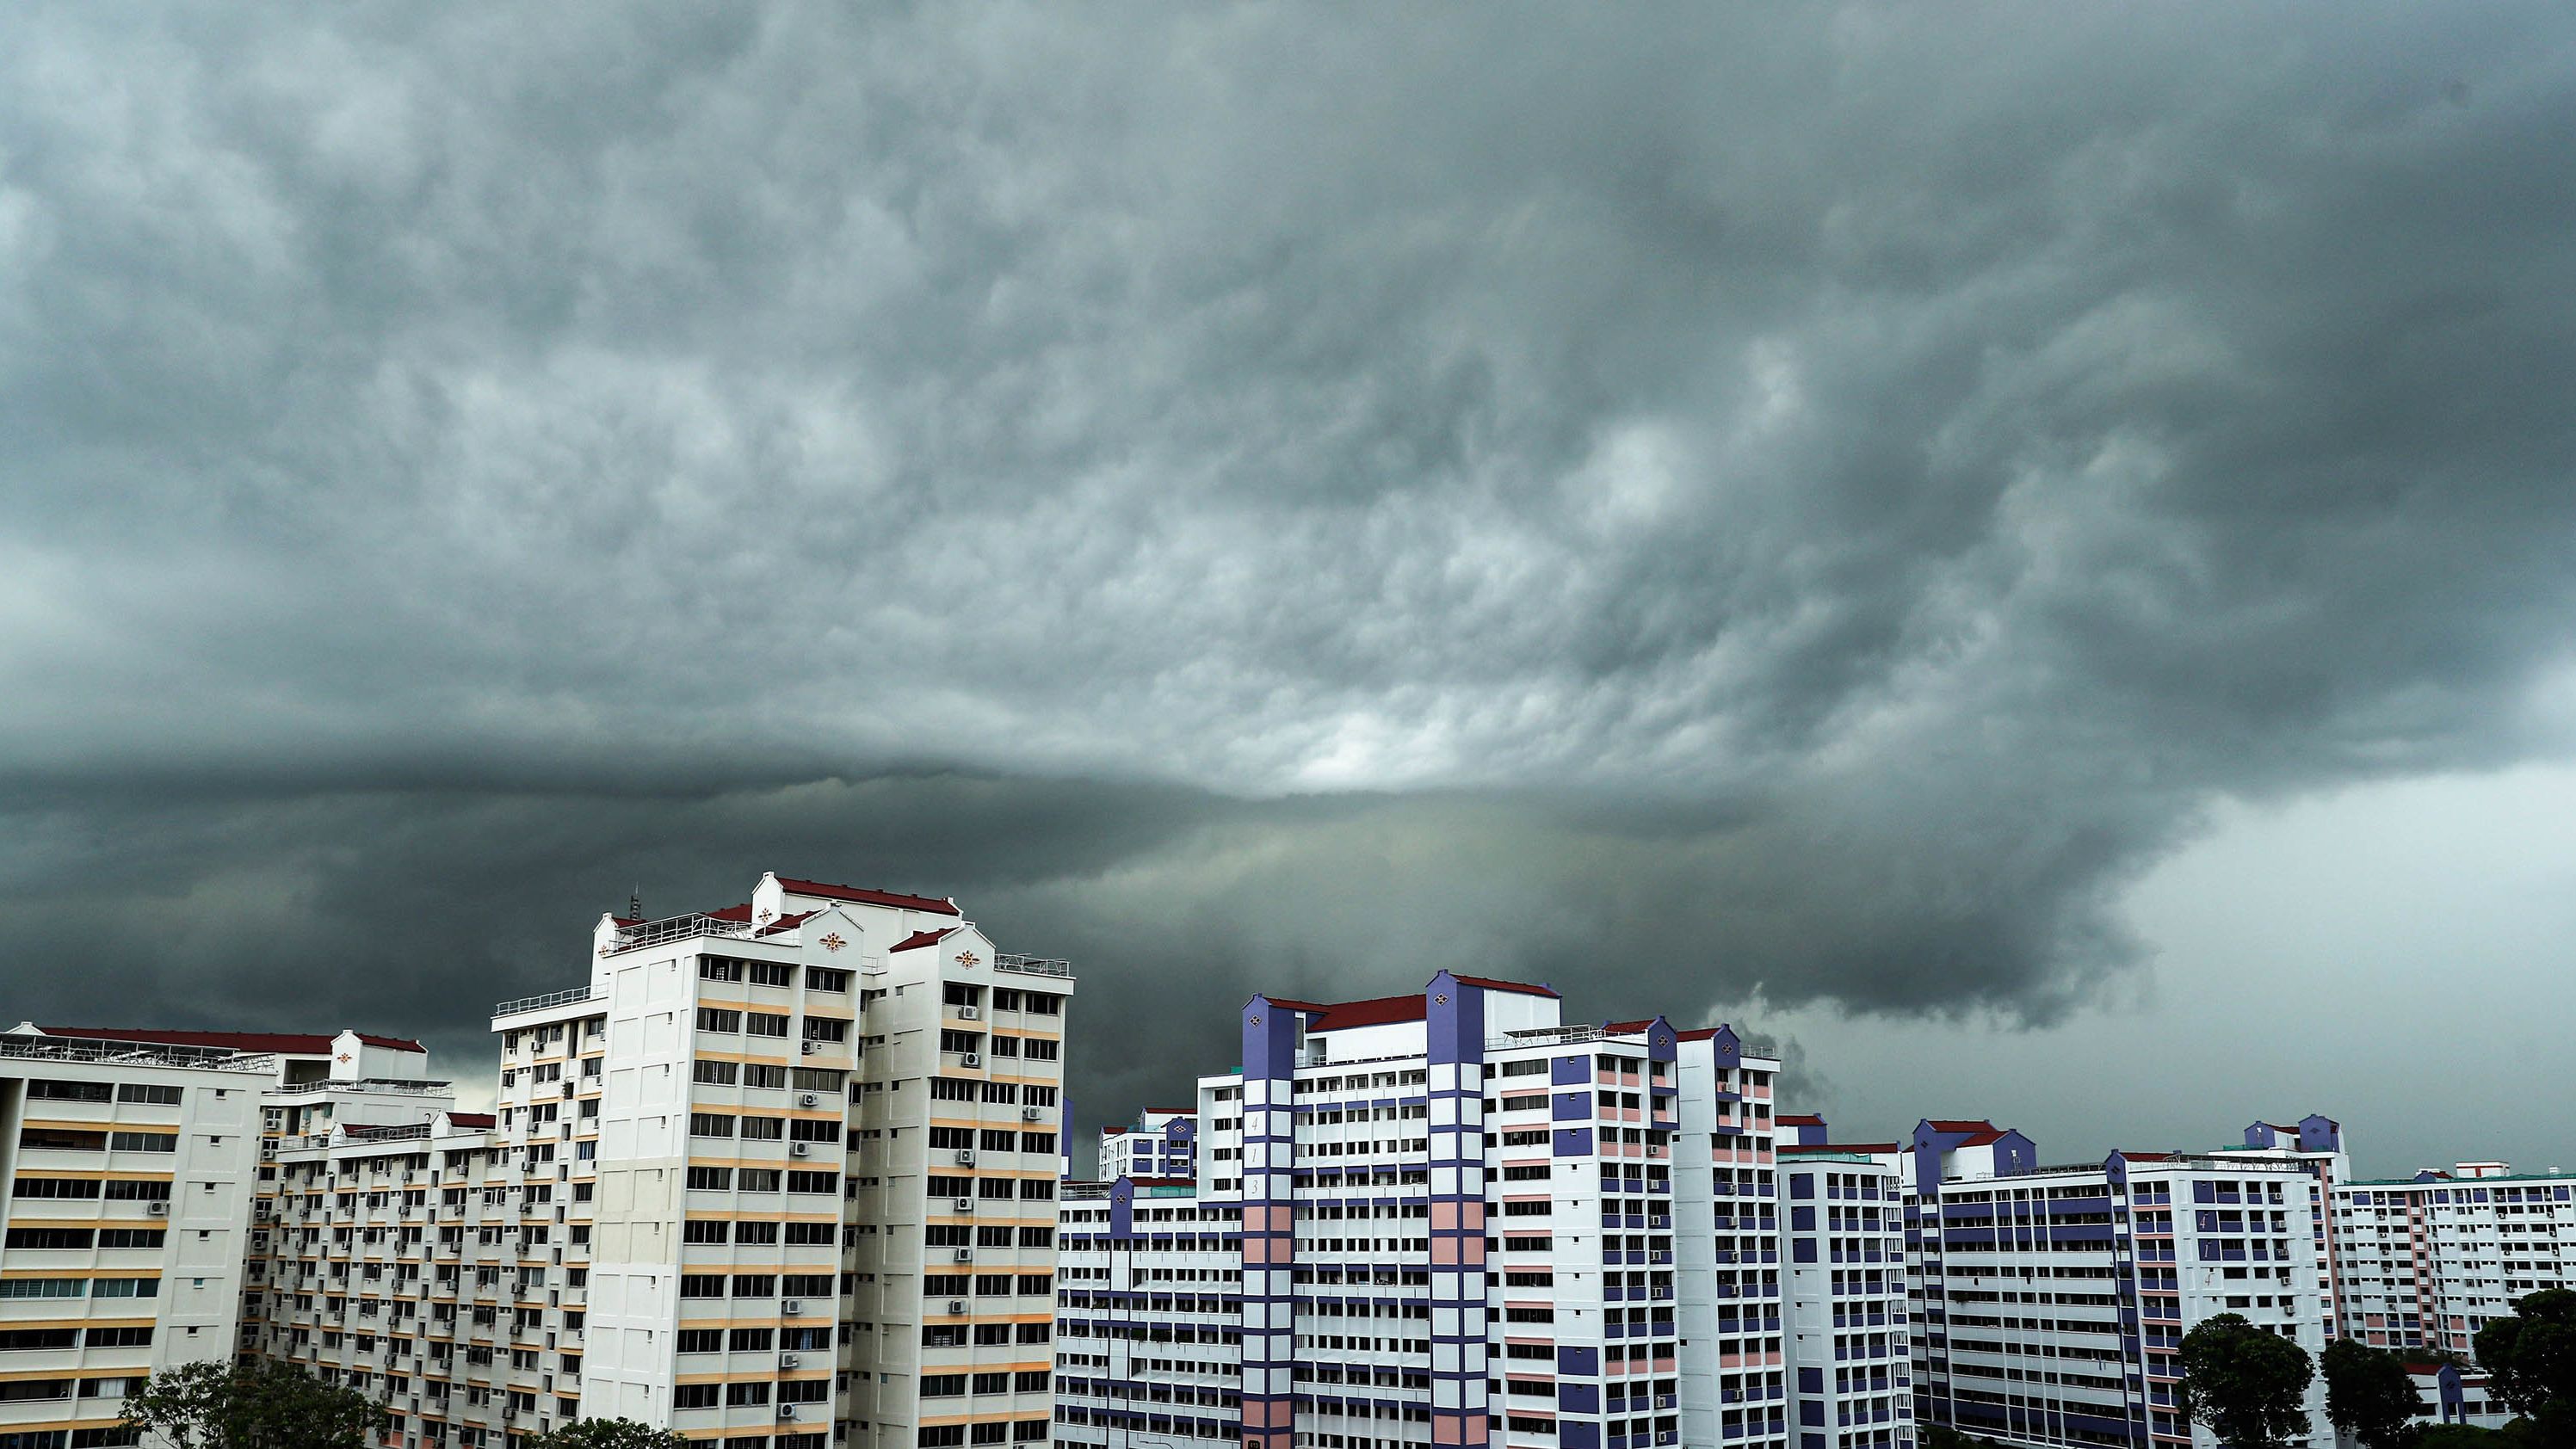 Storm clouds seen in the western part of Singapore.